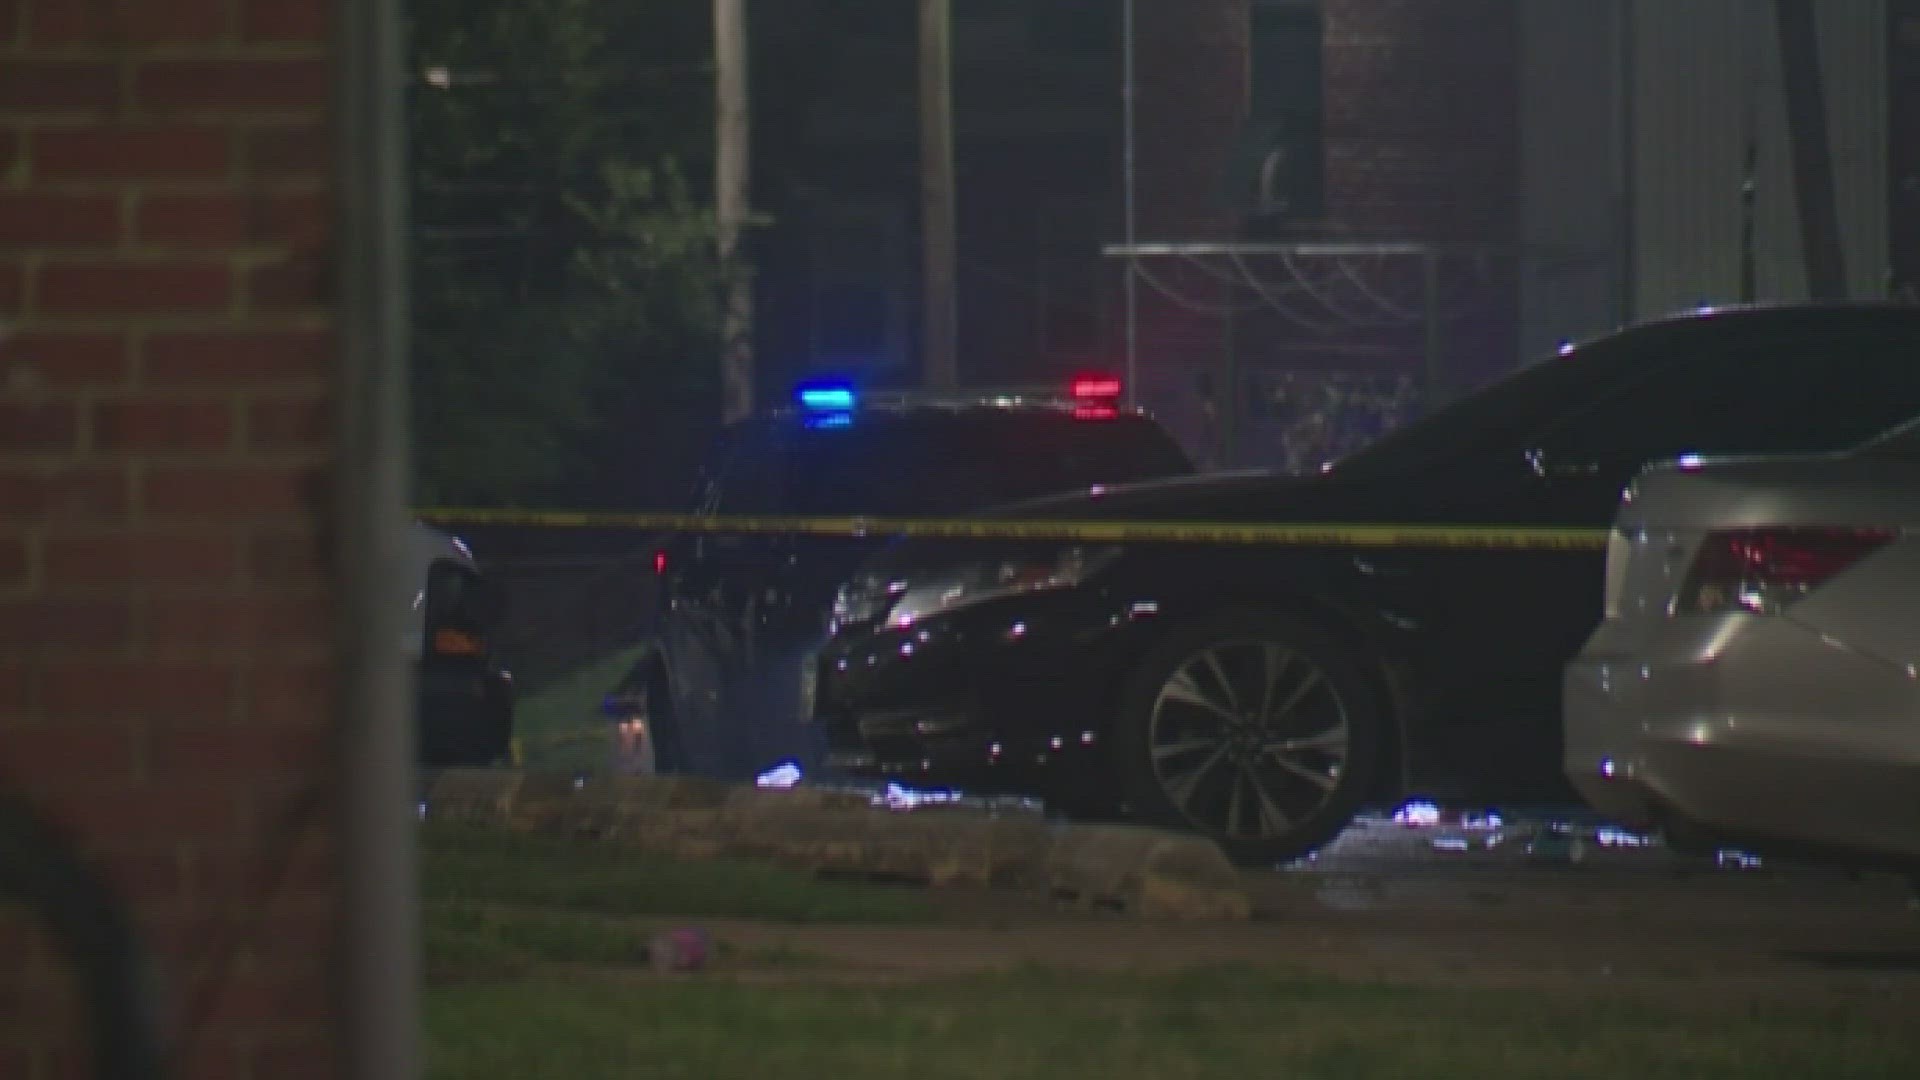 Police say a total of 30 people were shot. An 18-year-old woman and 20-year-old man were killed and three others are in critical condition.